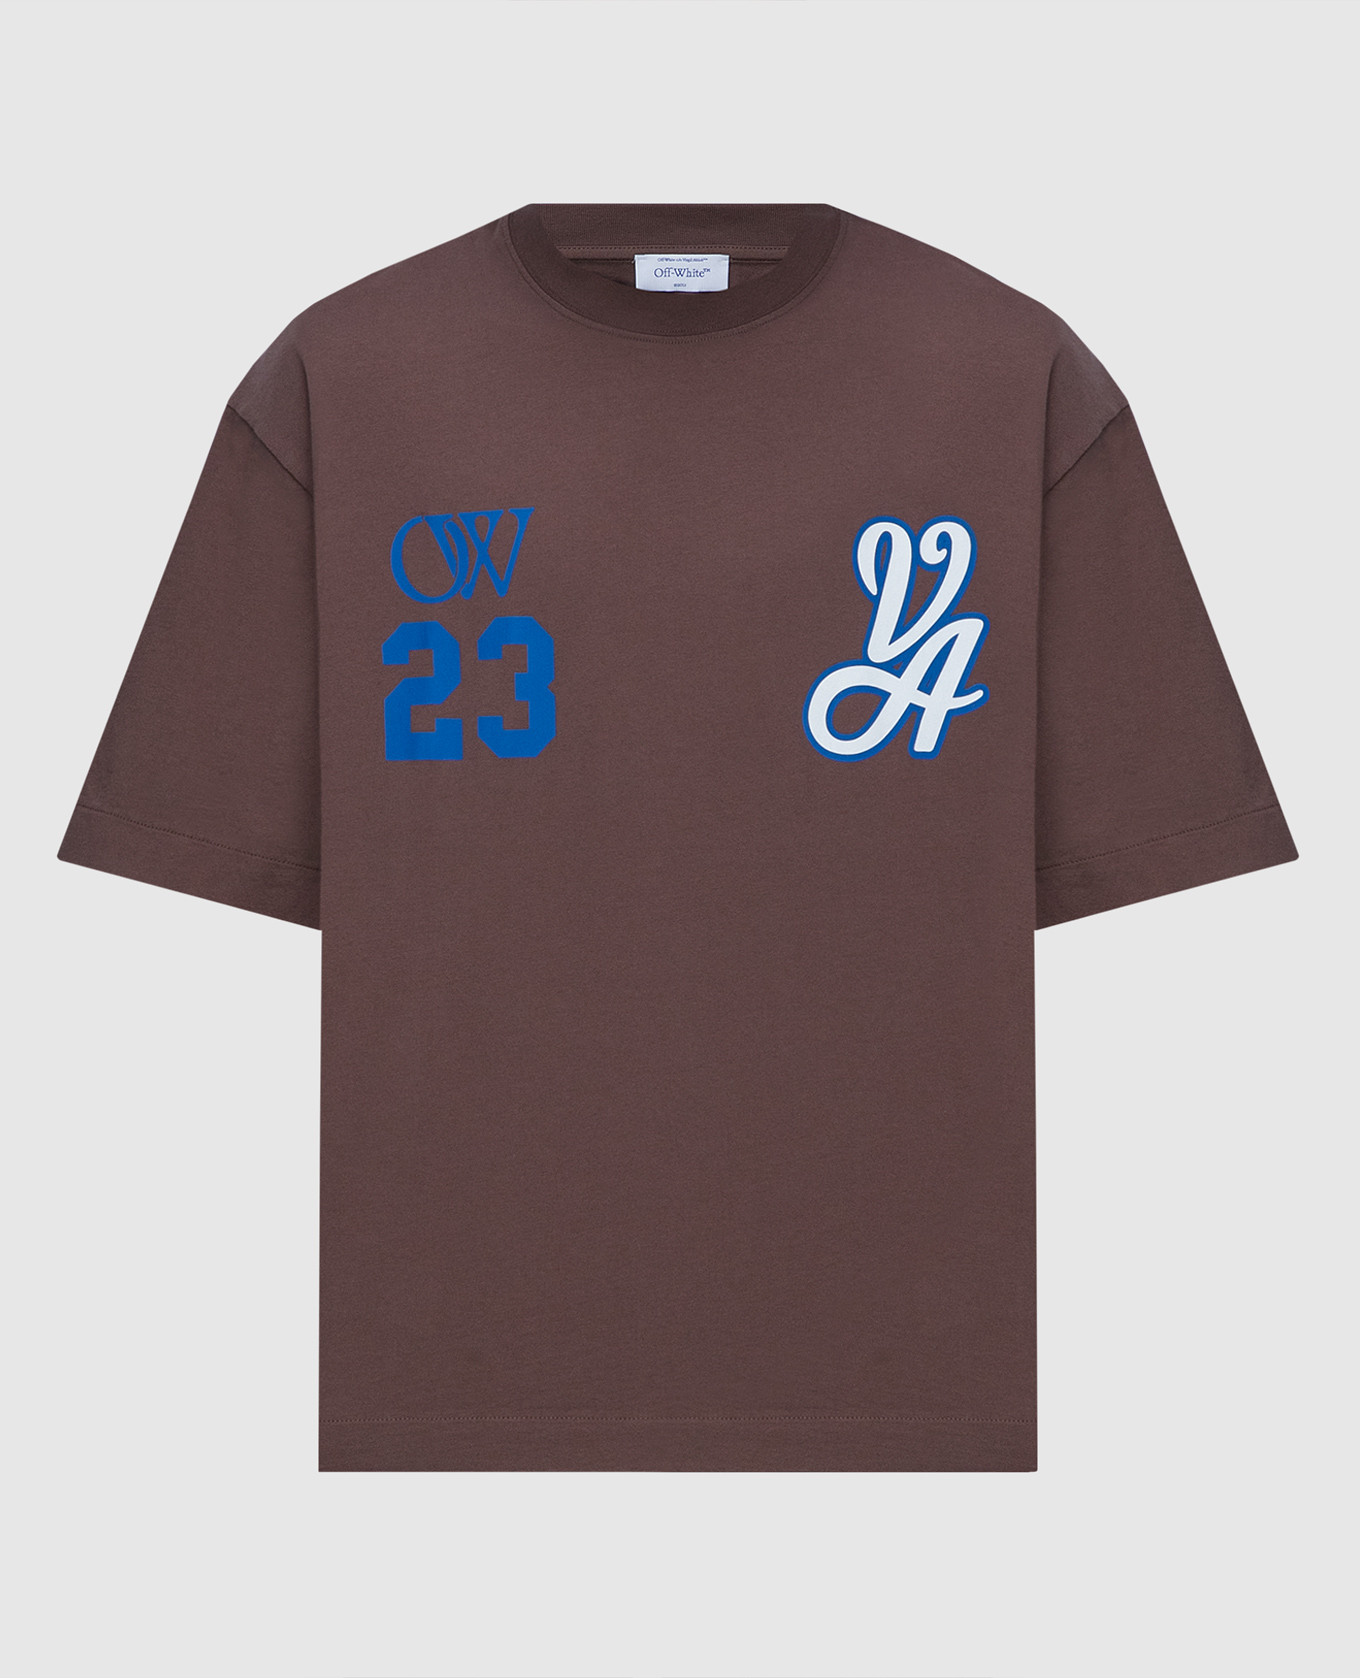 Brown T-shirt with a print